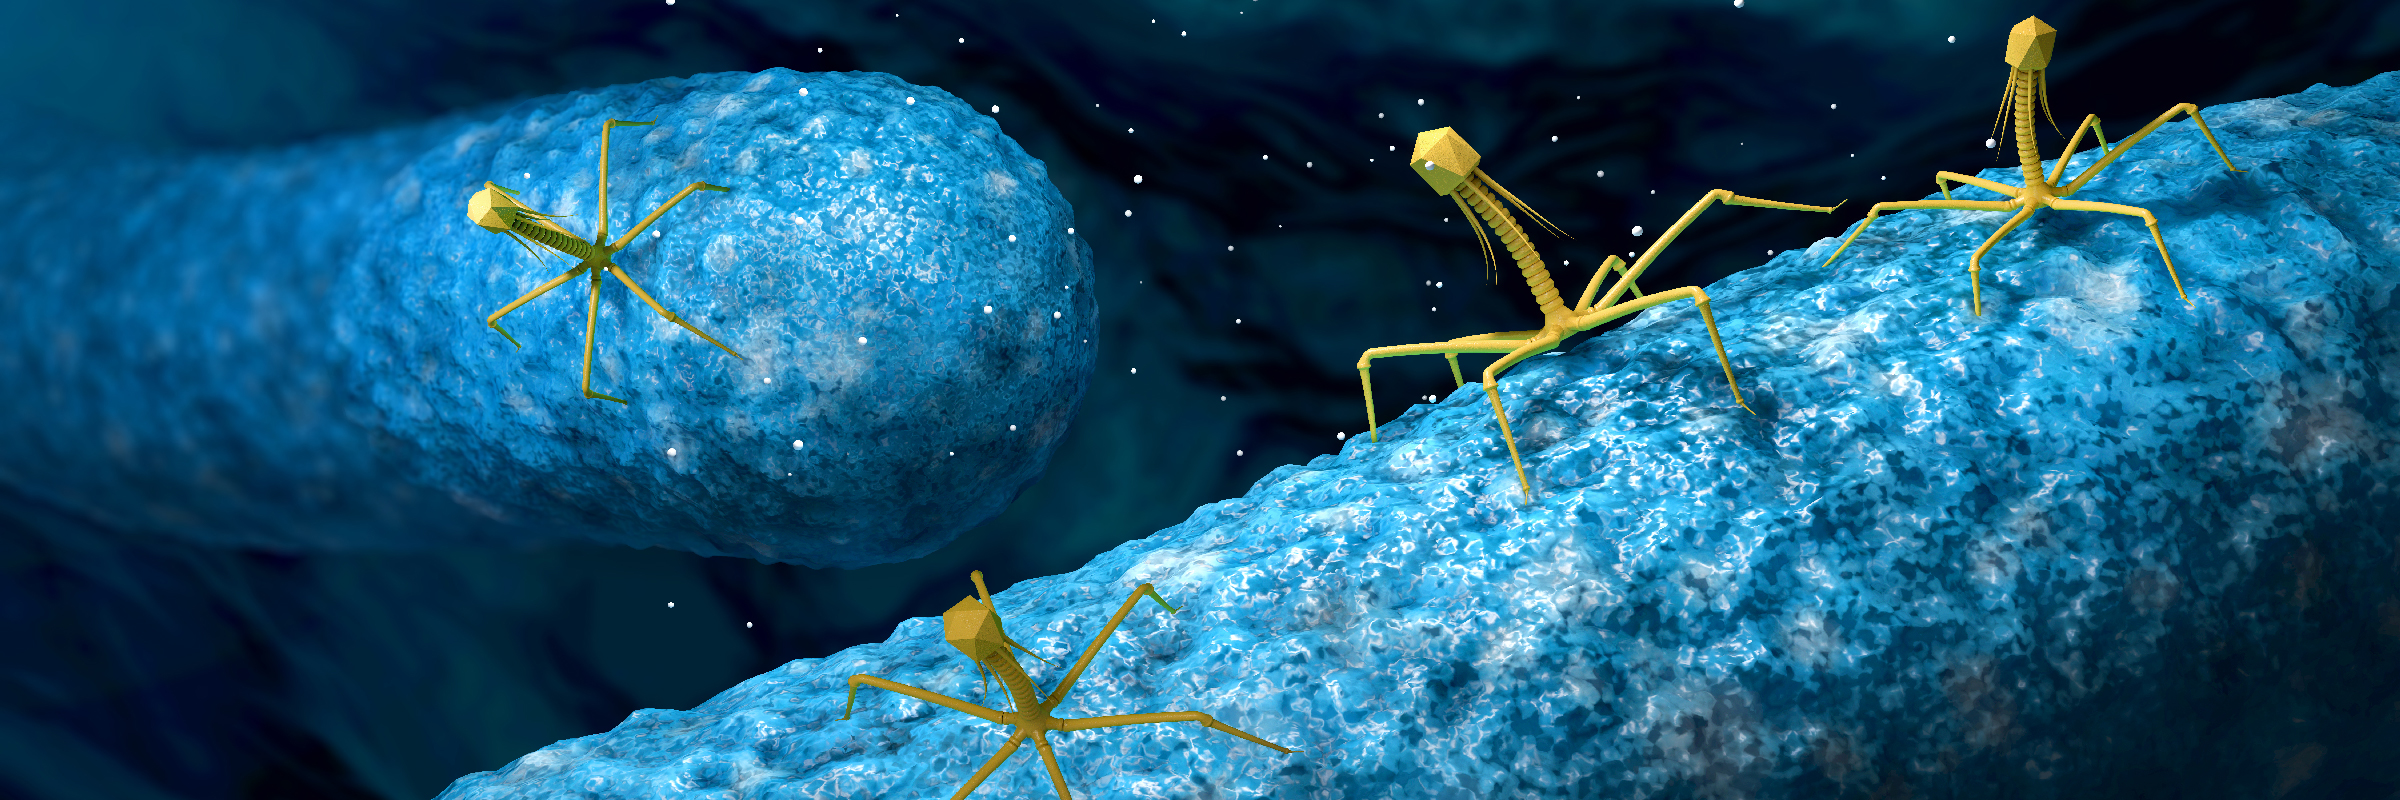 Phage virus attacking and infecting a bacteria